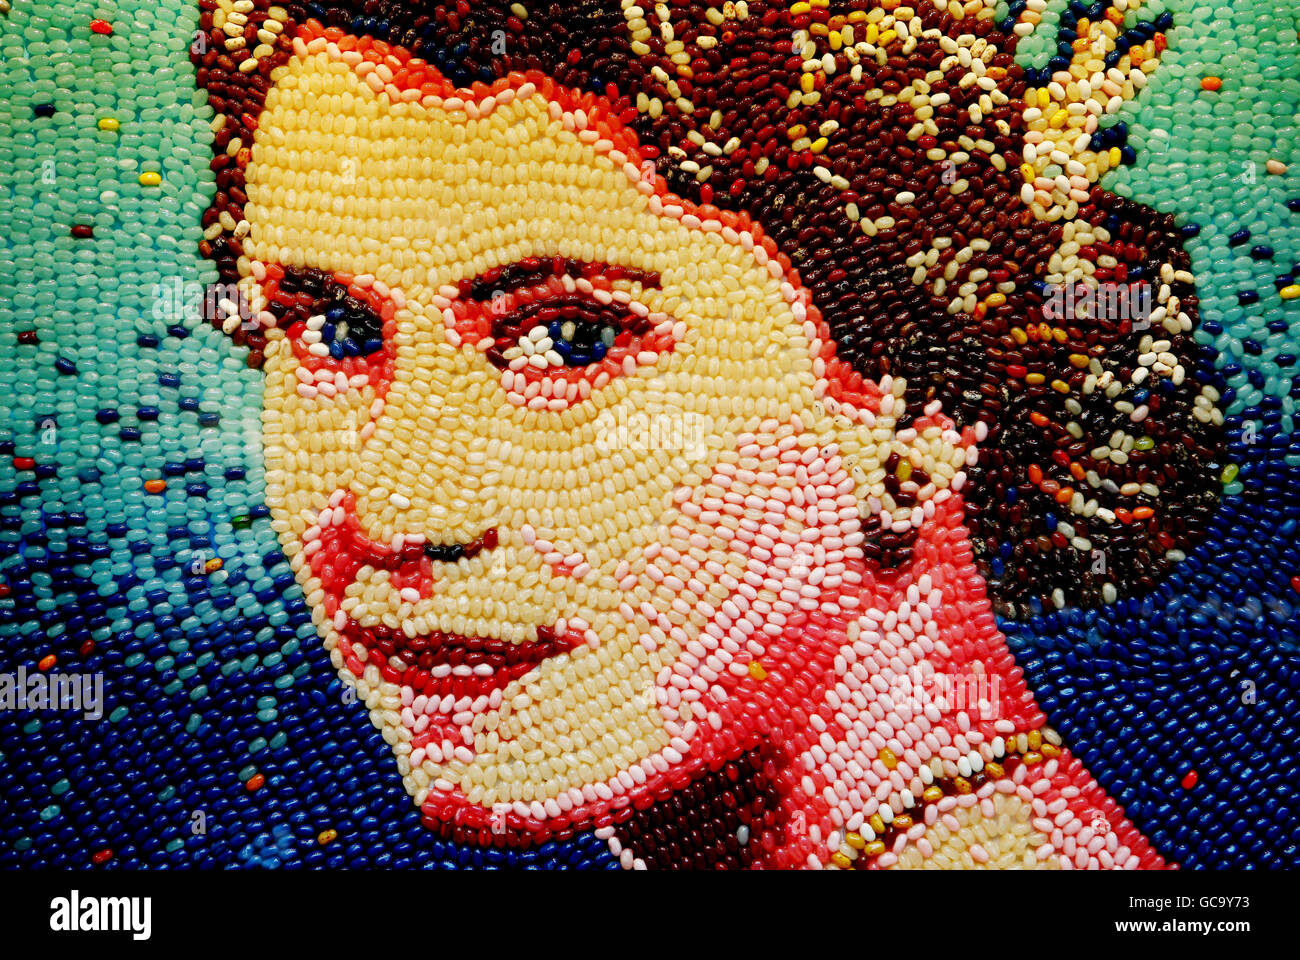 The 4ft square mosaic of Queen Elizabeth II currently on display in Fizziwig's Sweet Emporium which has been created by the firm Jelly Belly out of around 10,000 jelly beans. Stock Photo